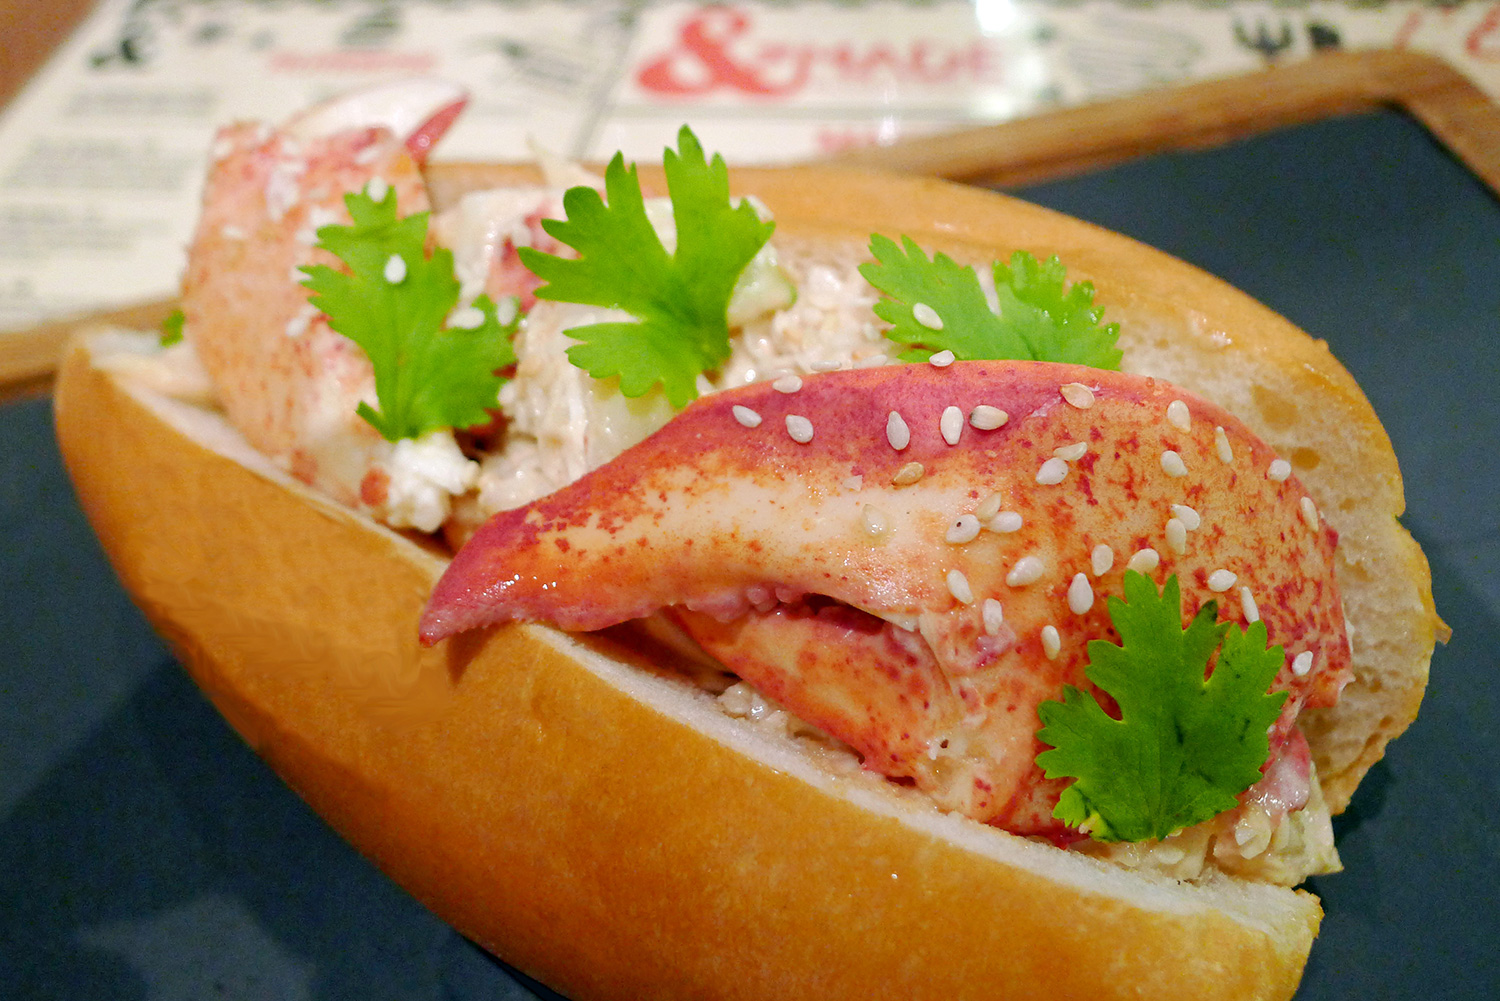 Quayside-Isle_&MADE-Burger-Bistro-L’entrecôte-Express_Lobster-Roll